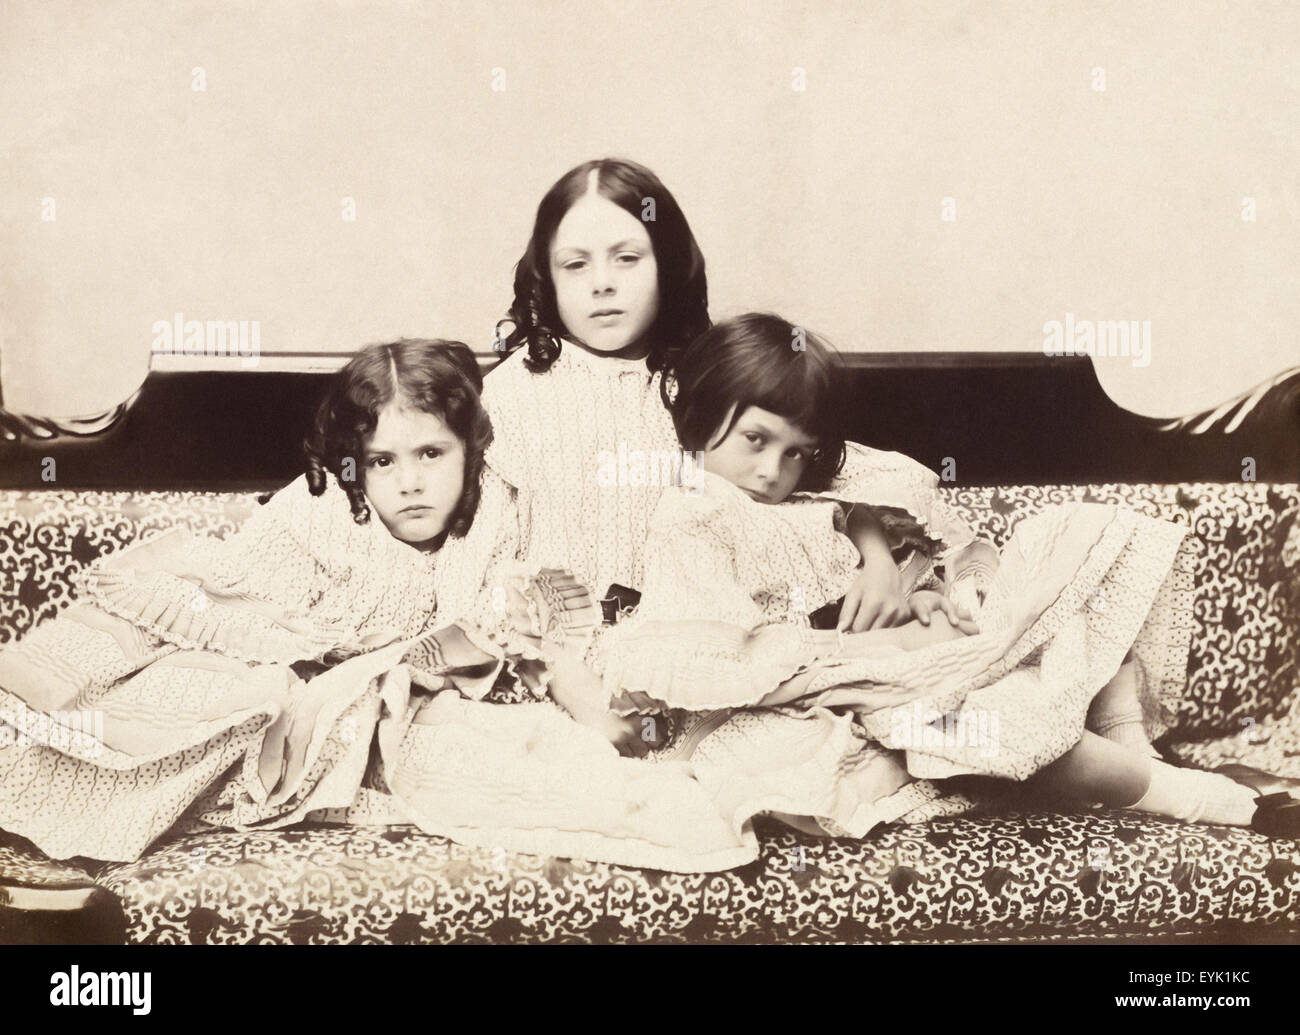 Alice Liddell (1852-1934) (right) with her sisters Edith (left) and Lorina (center) on a chaises longue. Alice Liddell is the namesake and inspiration behind Alice in Wonderland. Photographed by Charles Lutwidge Dodgson (1832-1898) better known as Lewis Carroll in 1858. Lewis Carroll made up some tales of Alice and her adventures down the rabbit hole to entertain them on a boating trip down the Isis in Oxfordshire in 1862. Stock Photo